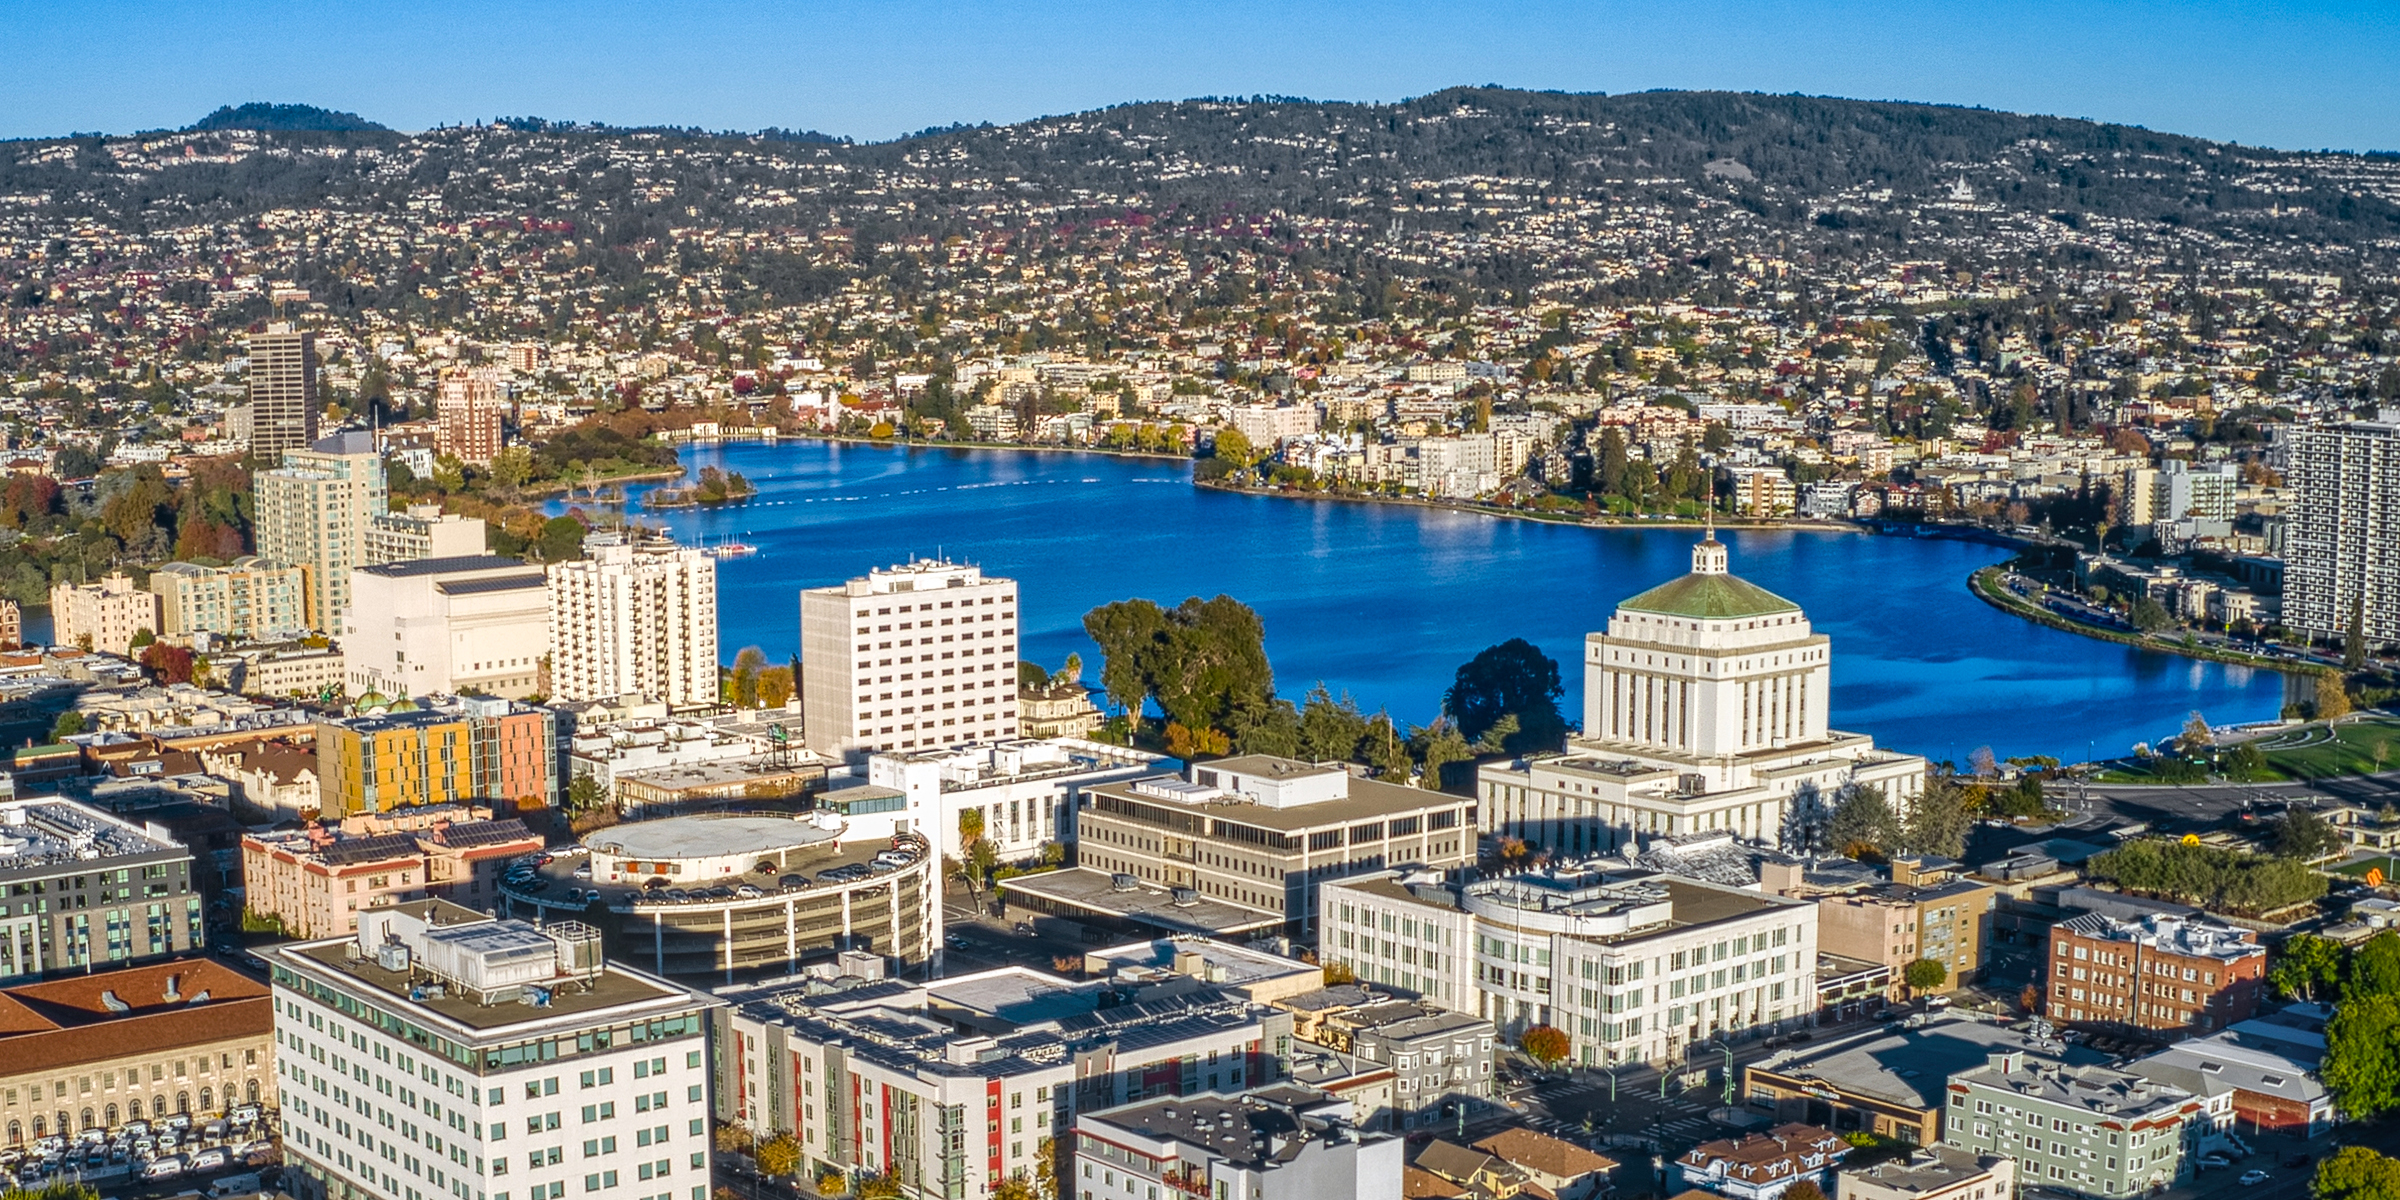 Aerial view of Oakland | Source: Shutterstock